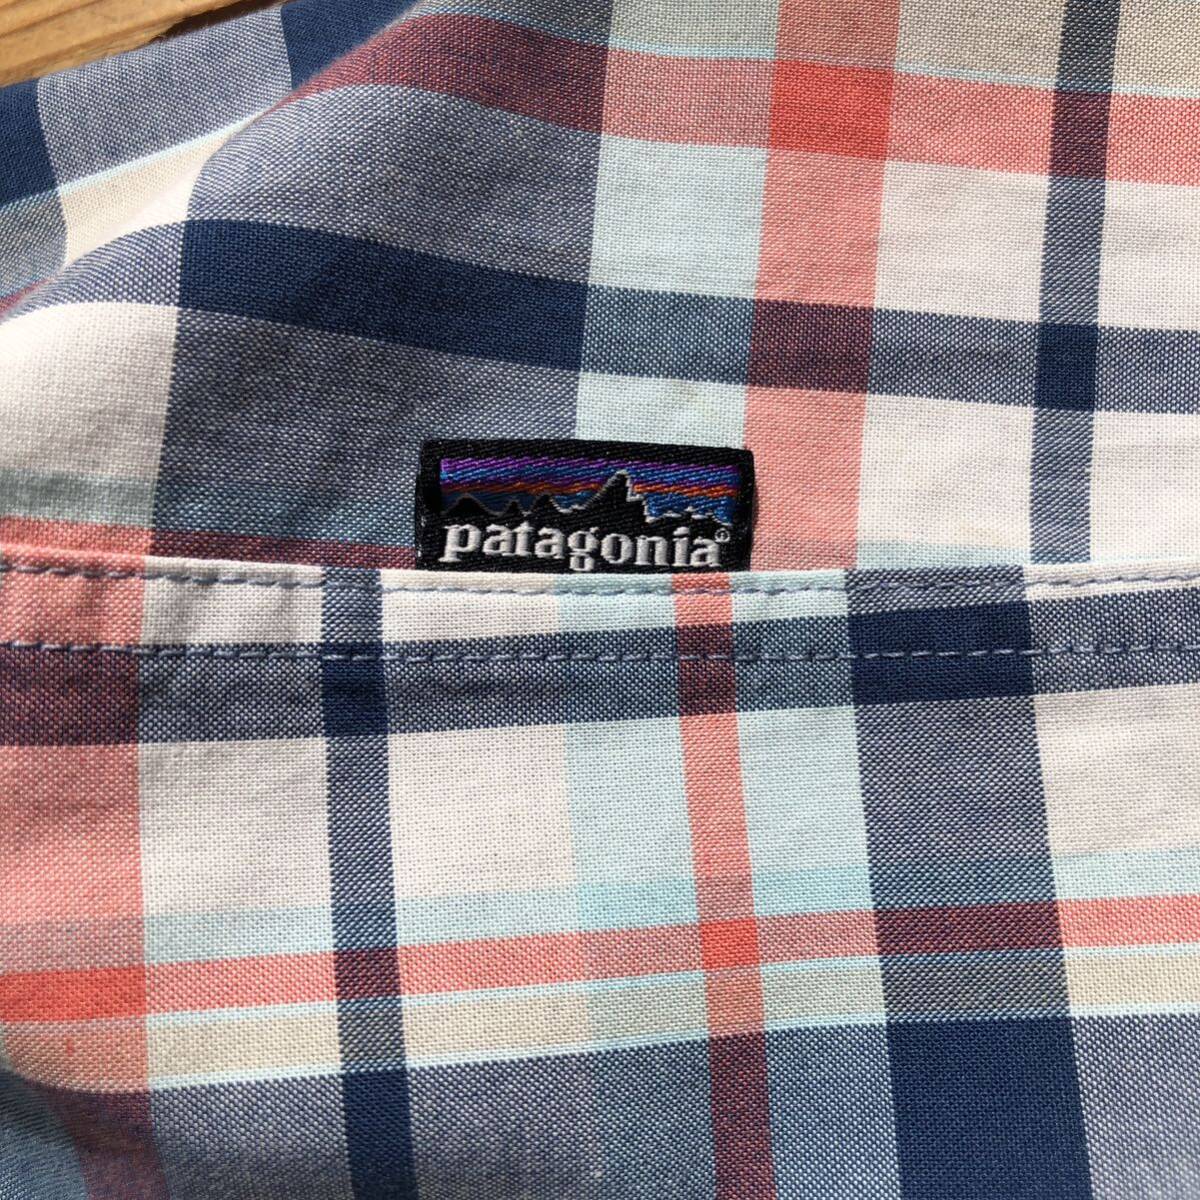 USA old clothes PATAGONIA Patagonia short sleeves ma gong s check shirt men's L size organic cotton spring thing summer thing American Casual stylish T2495